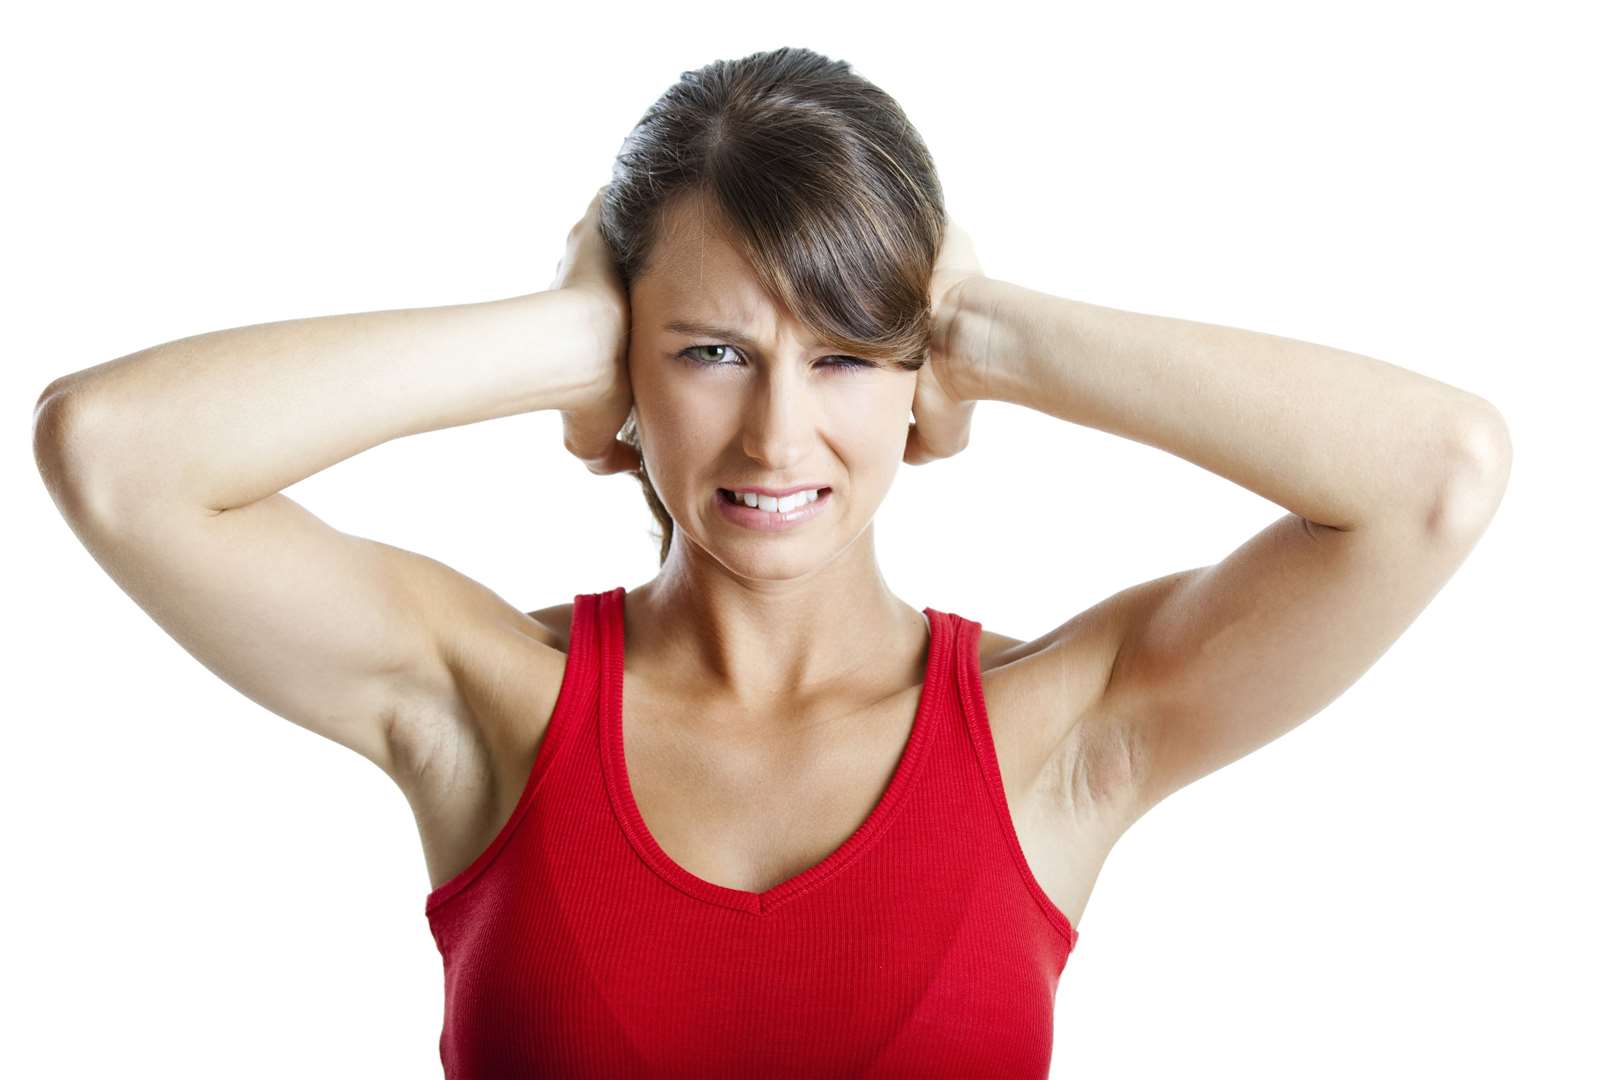 Are you one of the many people who suffers from Misophonia? Stock picture: Think Stock image